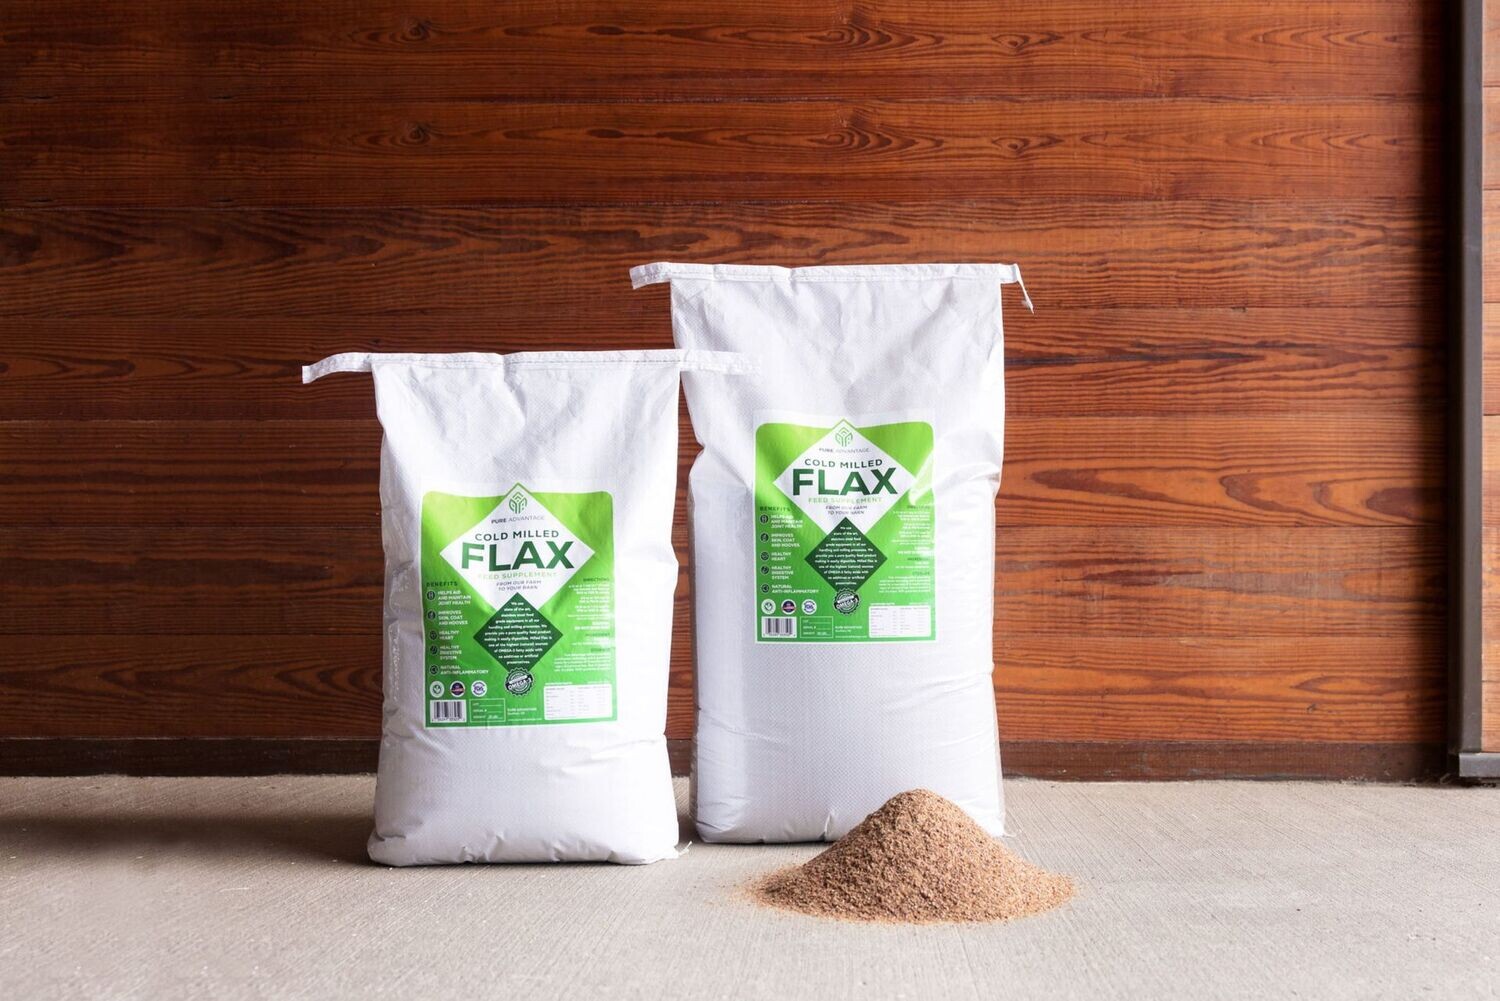 Cold Milled Flax 25 LB